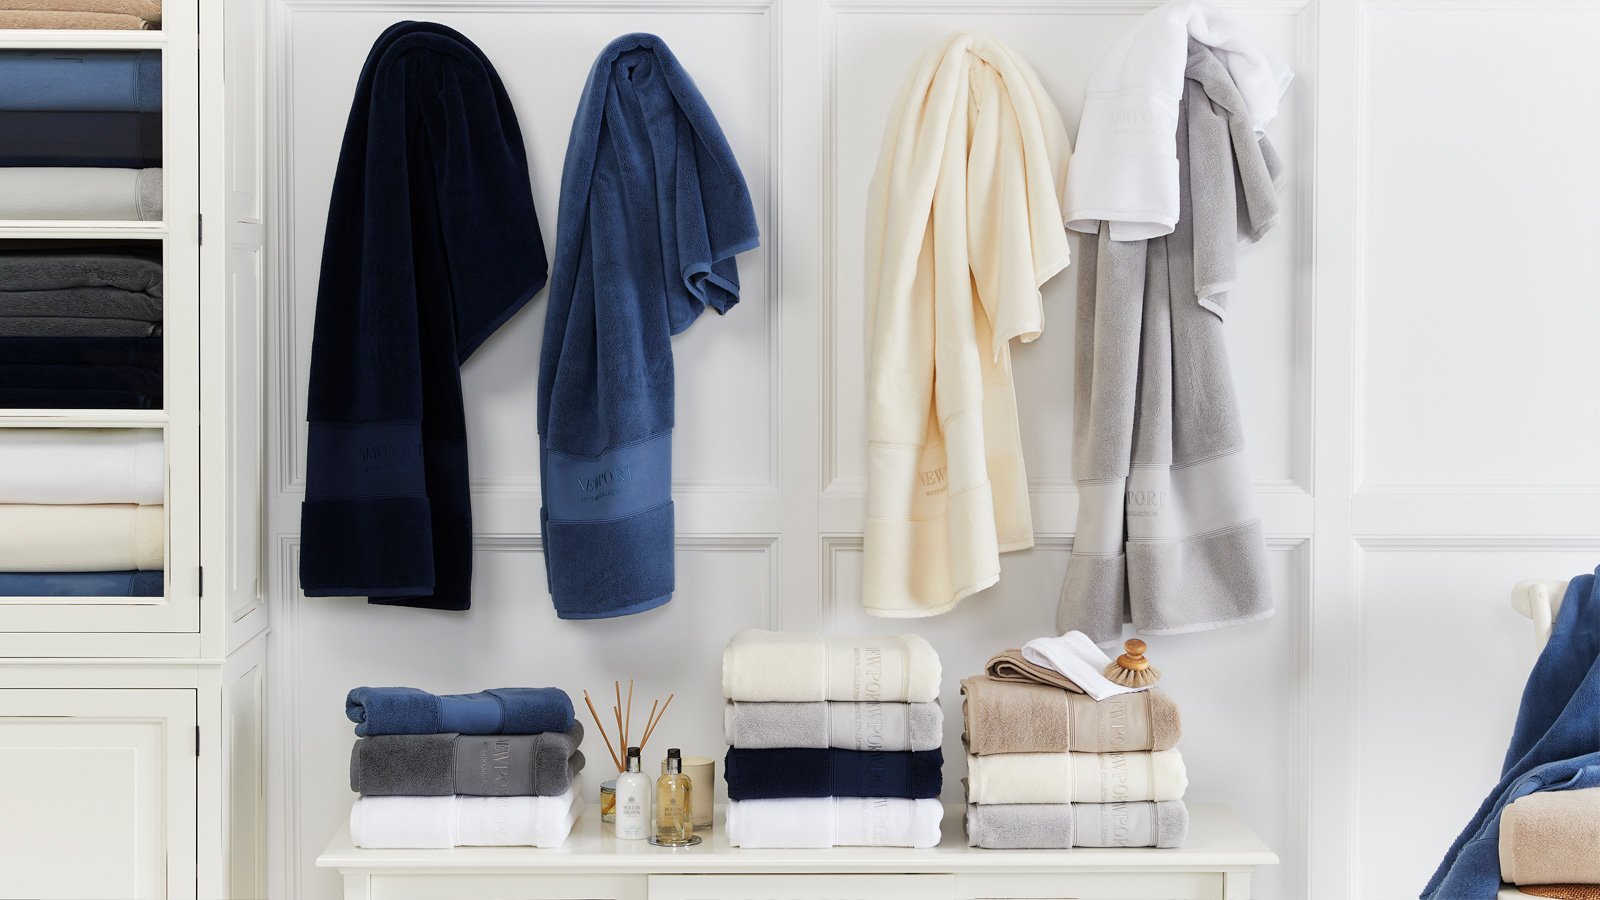 Towels | Wide selection of timeless towels